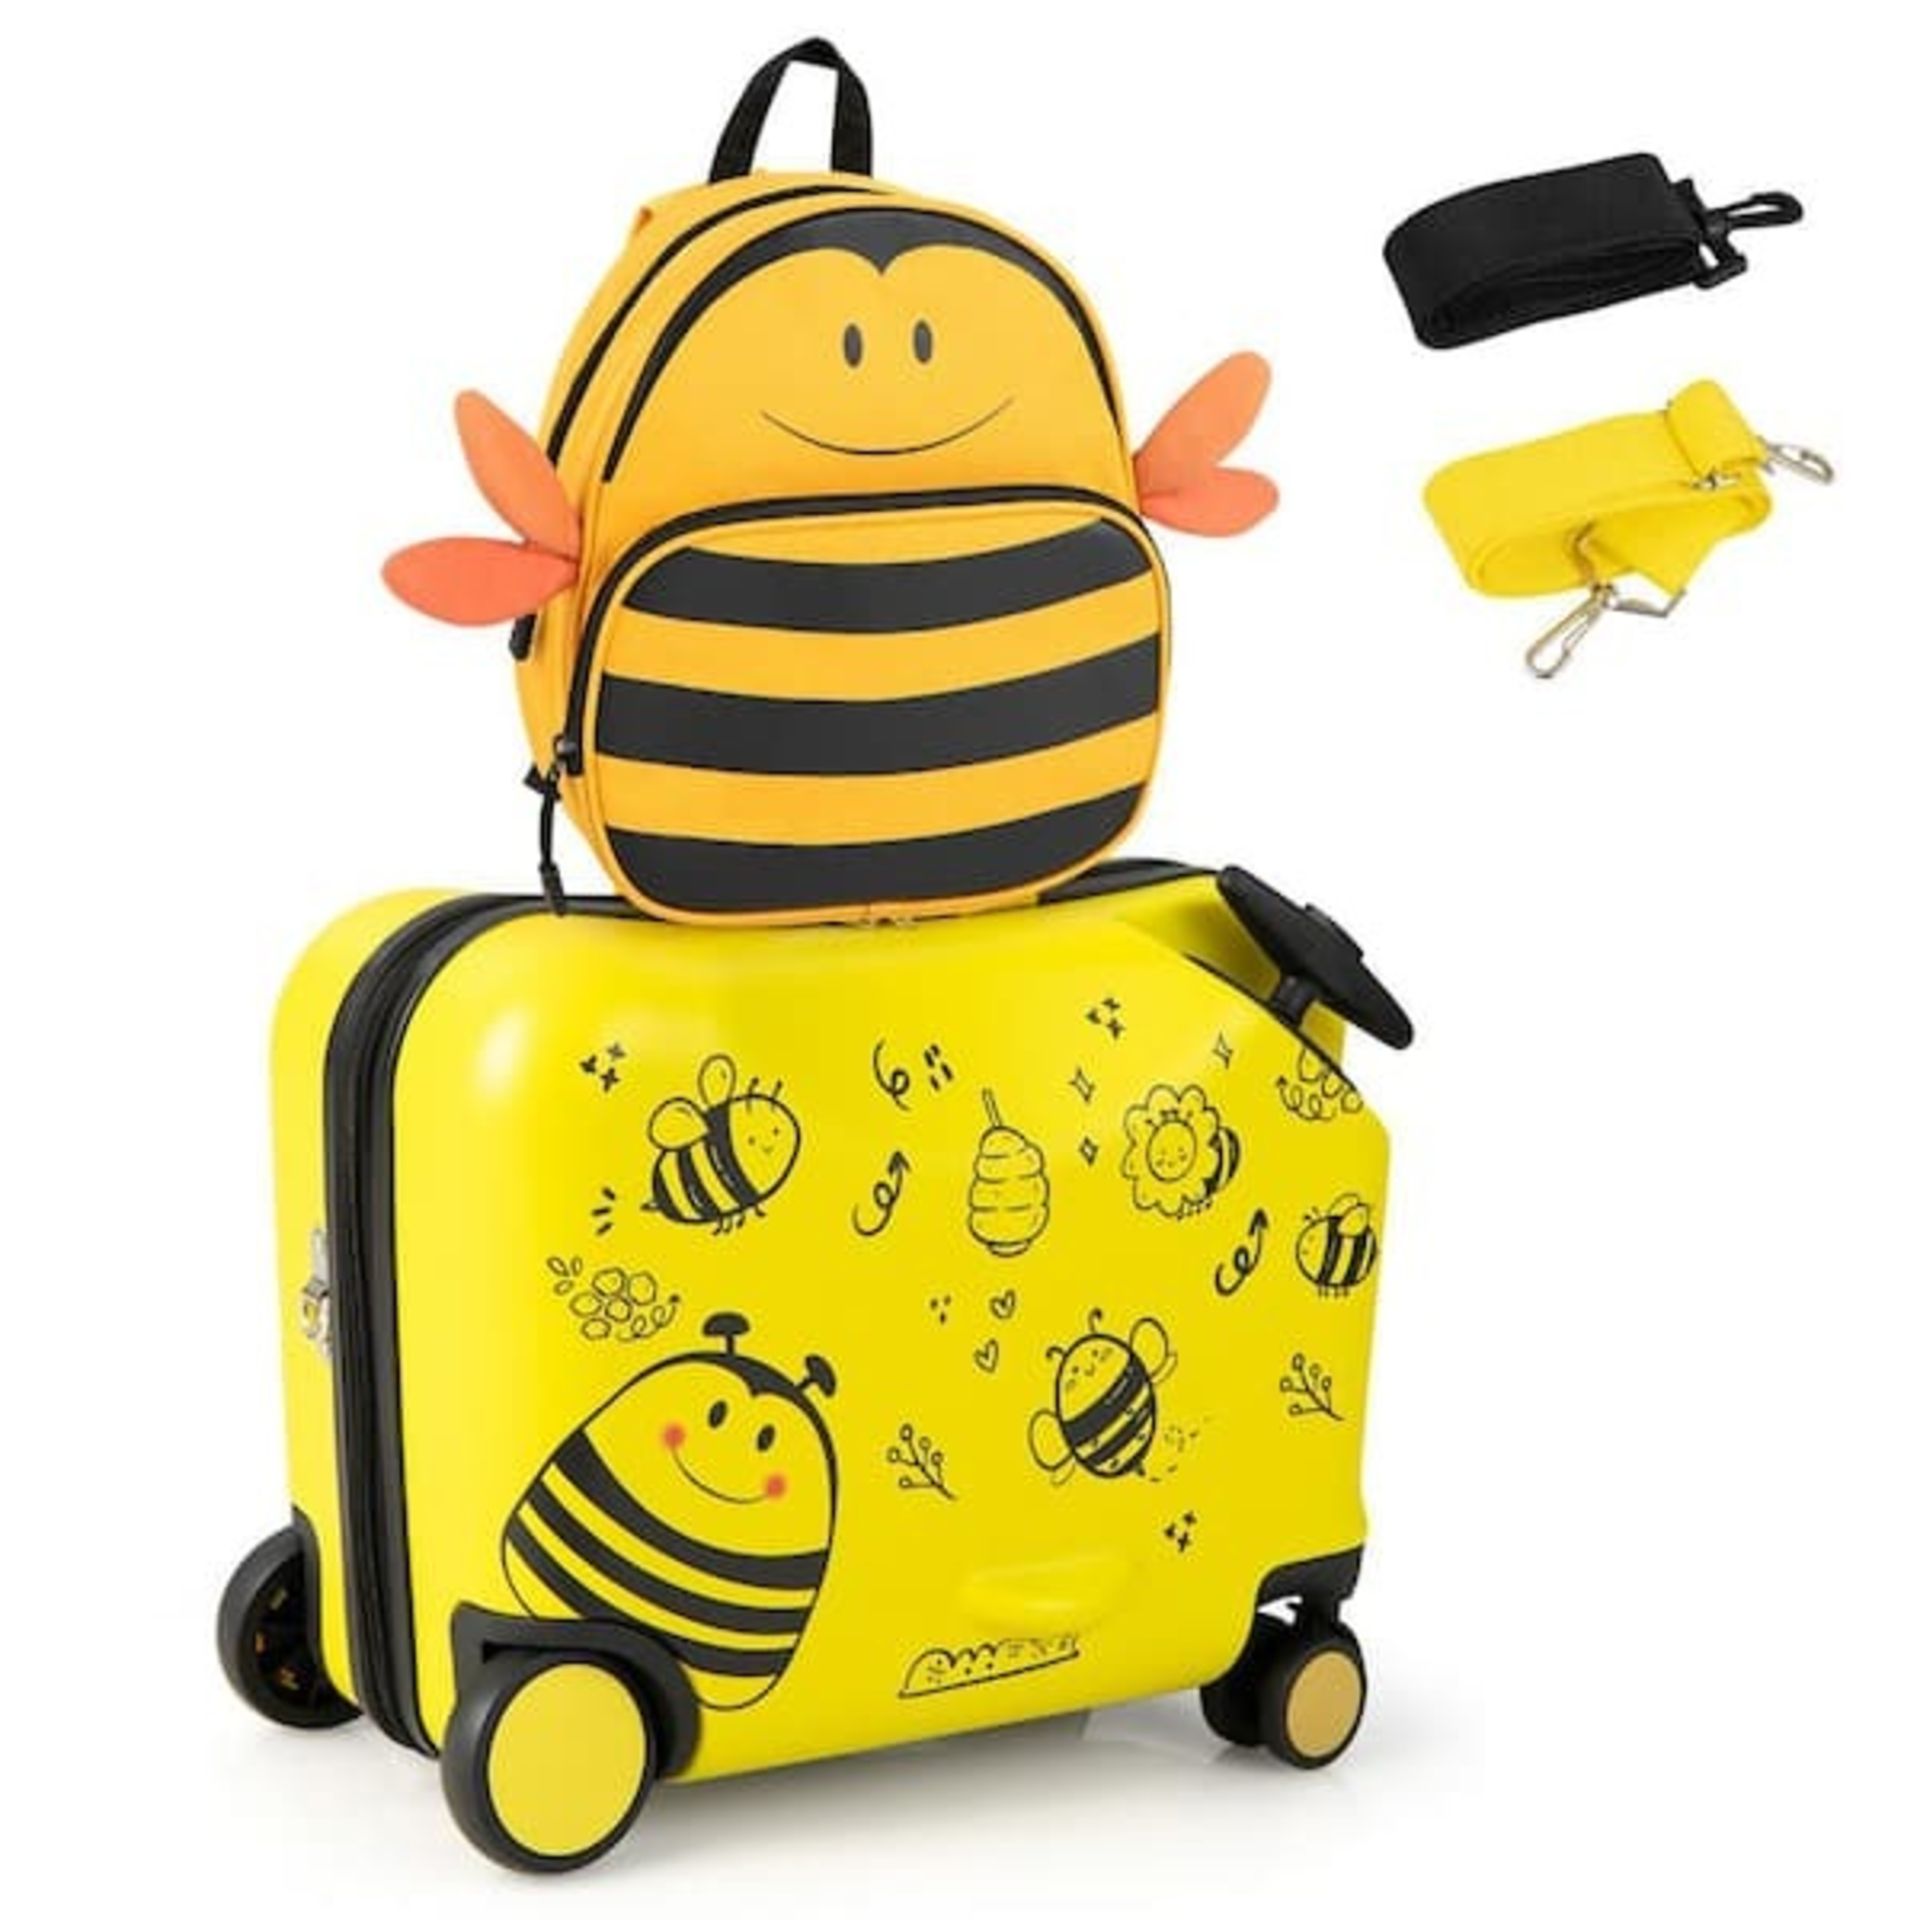 2-Piece Kids Ride on Luggage Set 18 in. Carry-on Suitcase - eR54